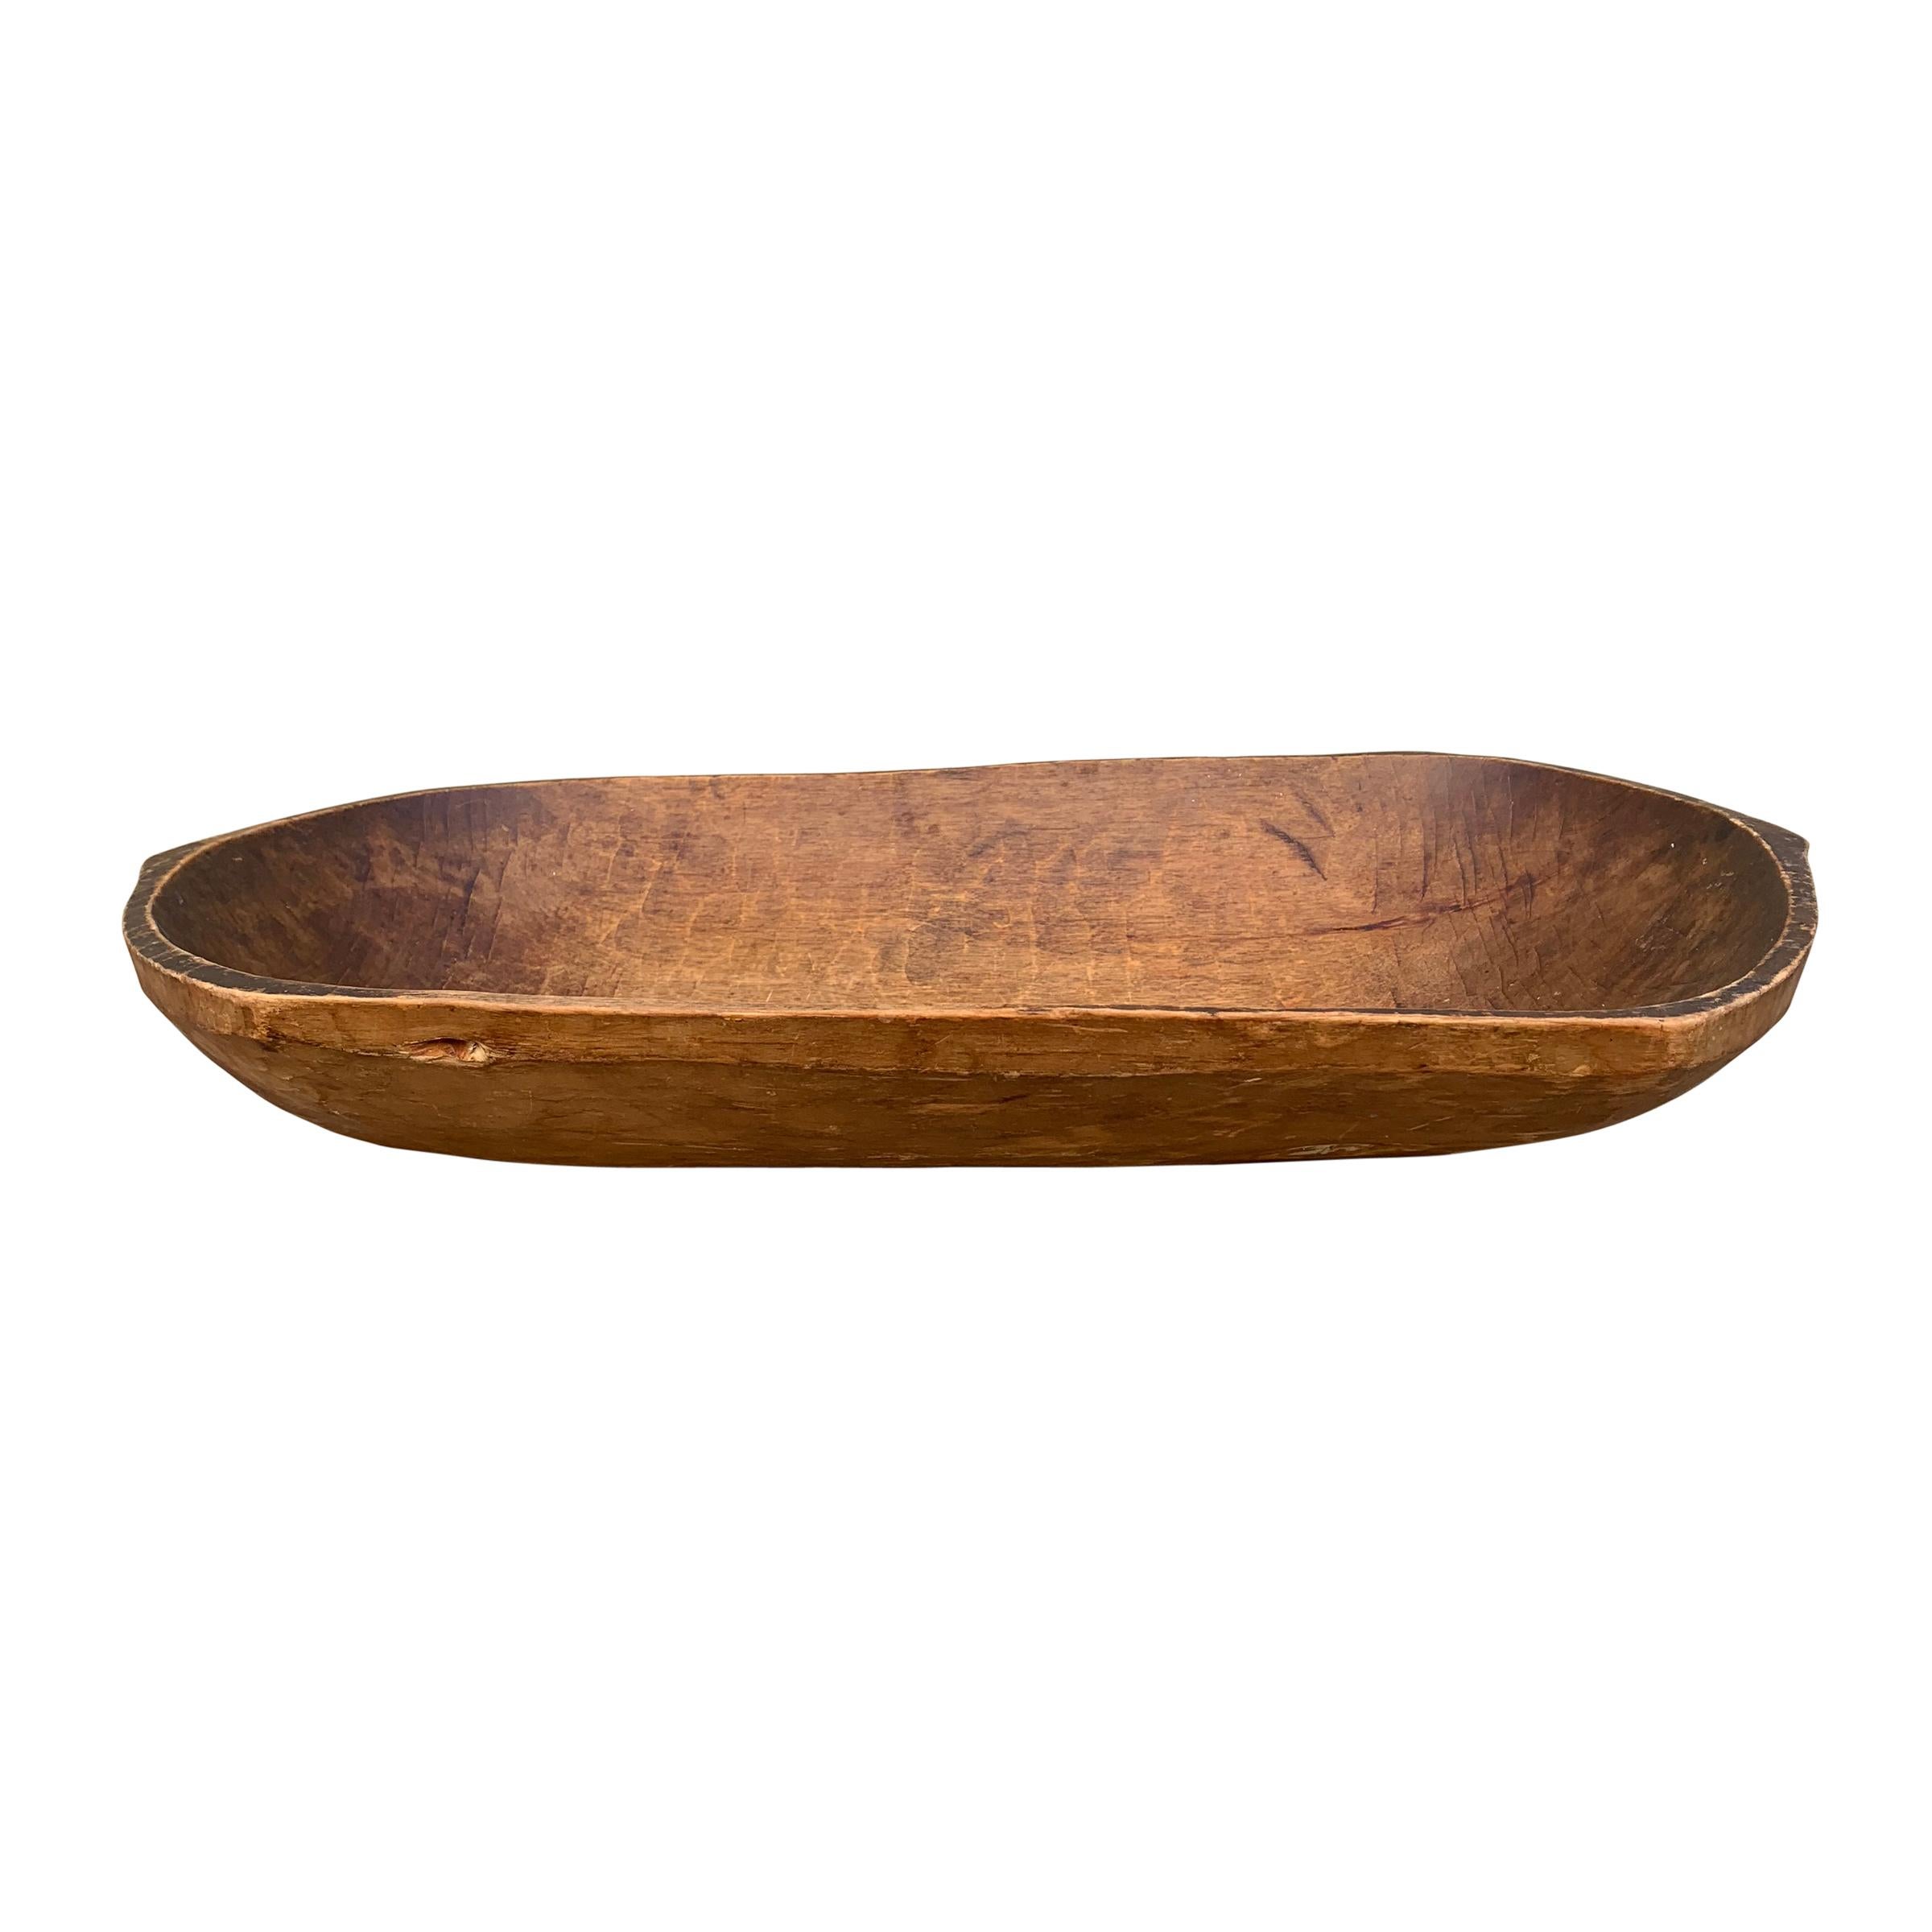 A gorgeous 19th century American hand carved wood dough bowl with pointed ends, and a wonderful patina.